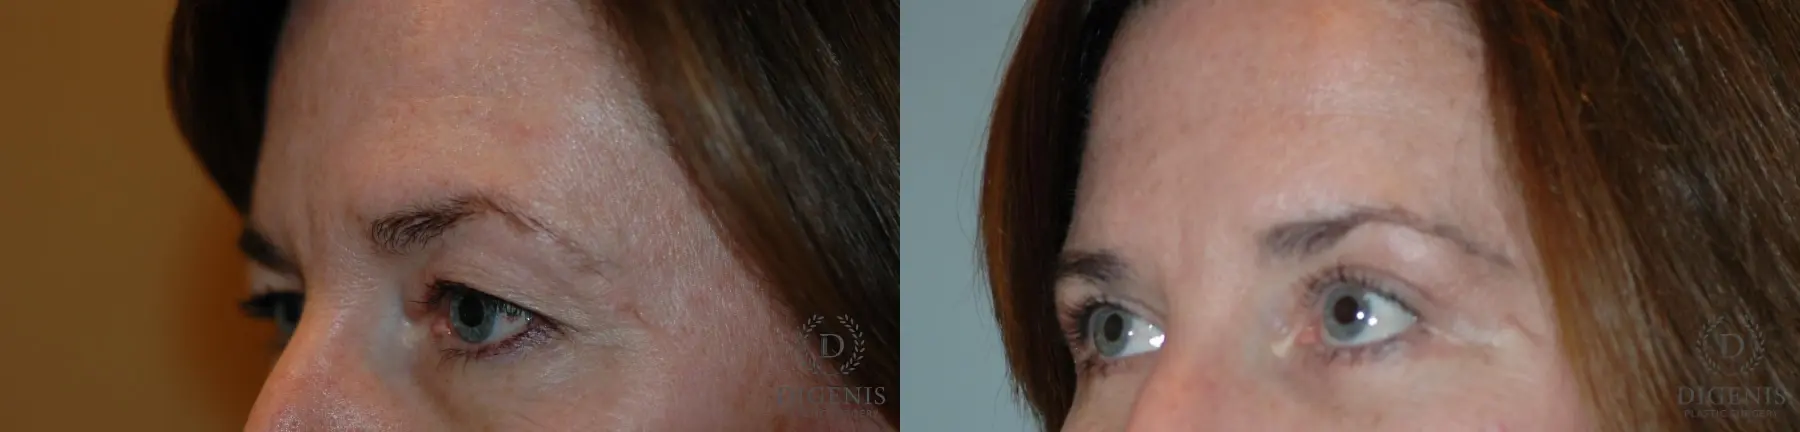 Eyelid Surgery: Patient 3 - Before and After 3